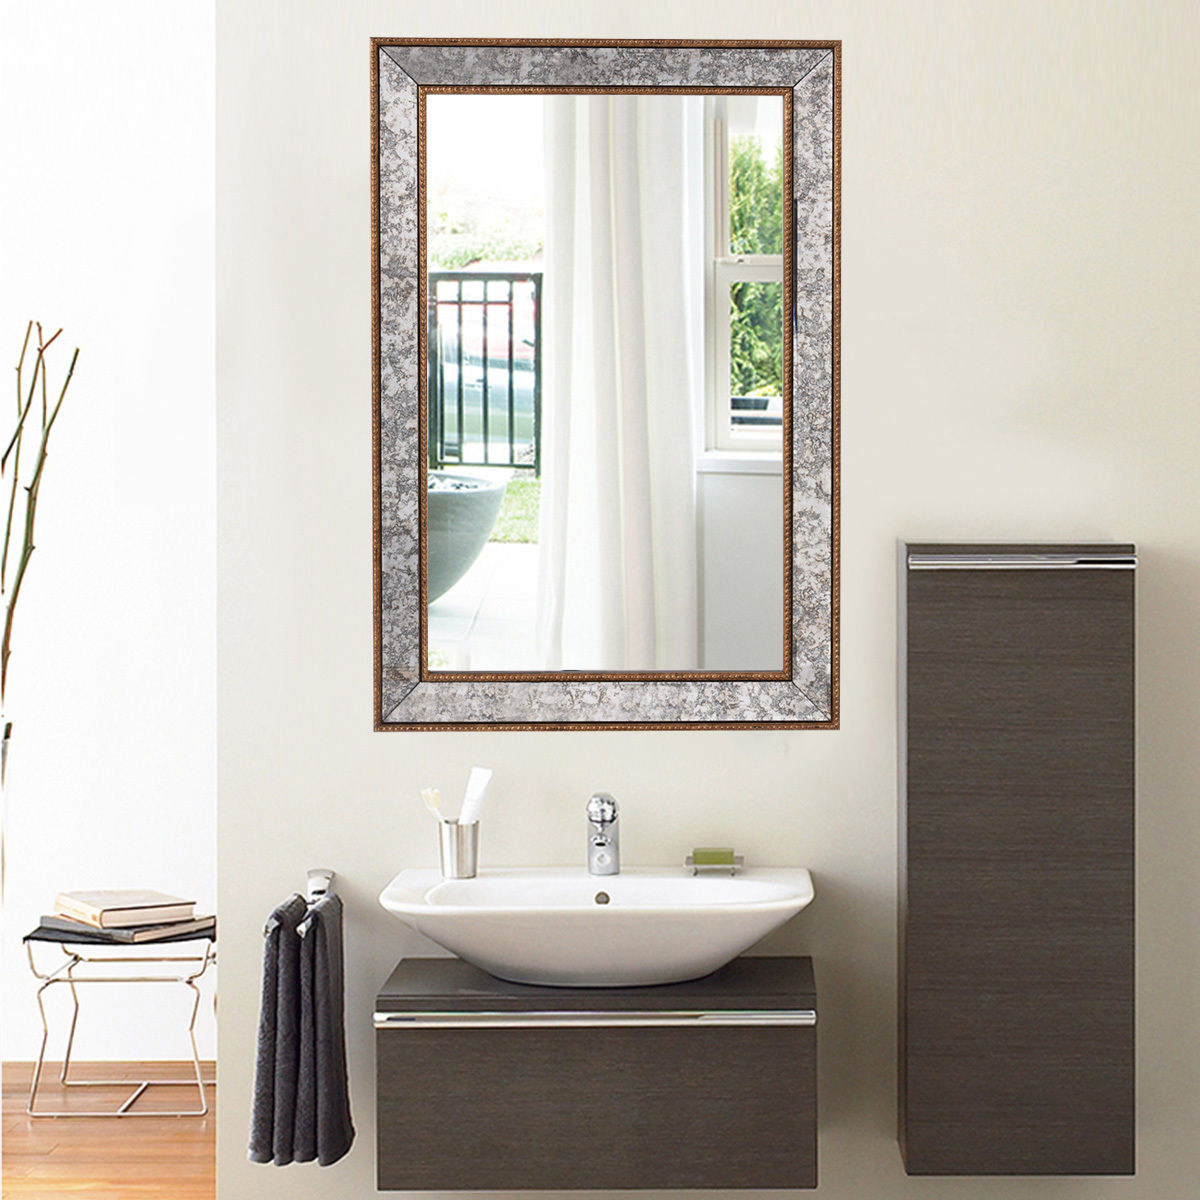 Walmart Bathroom Mirrors
 39 Pieces Furniture From Walmart You ll Actually Want